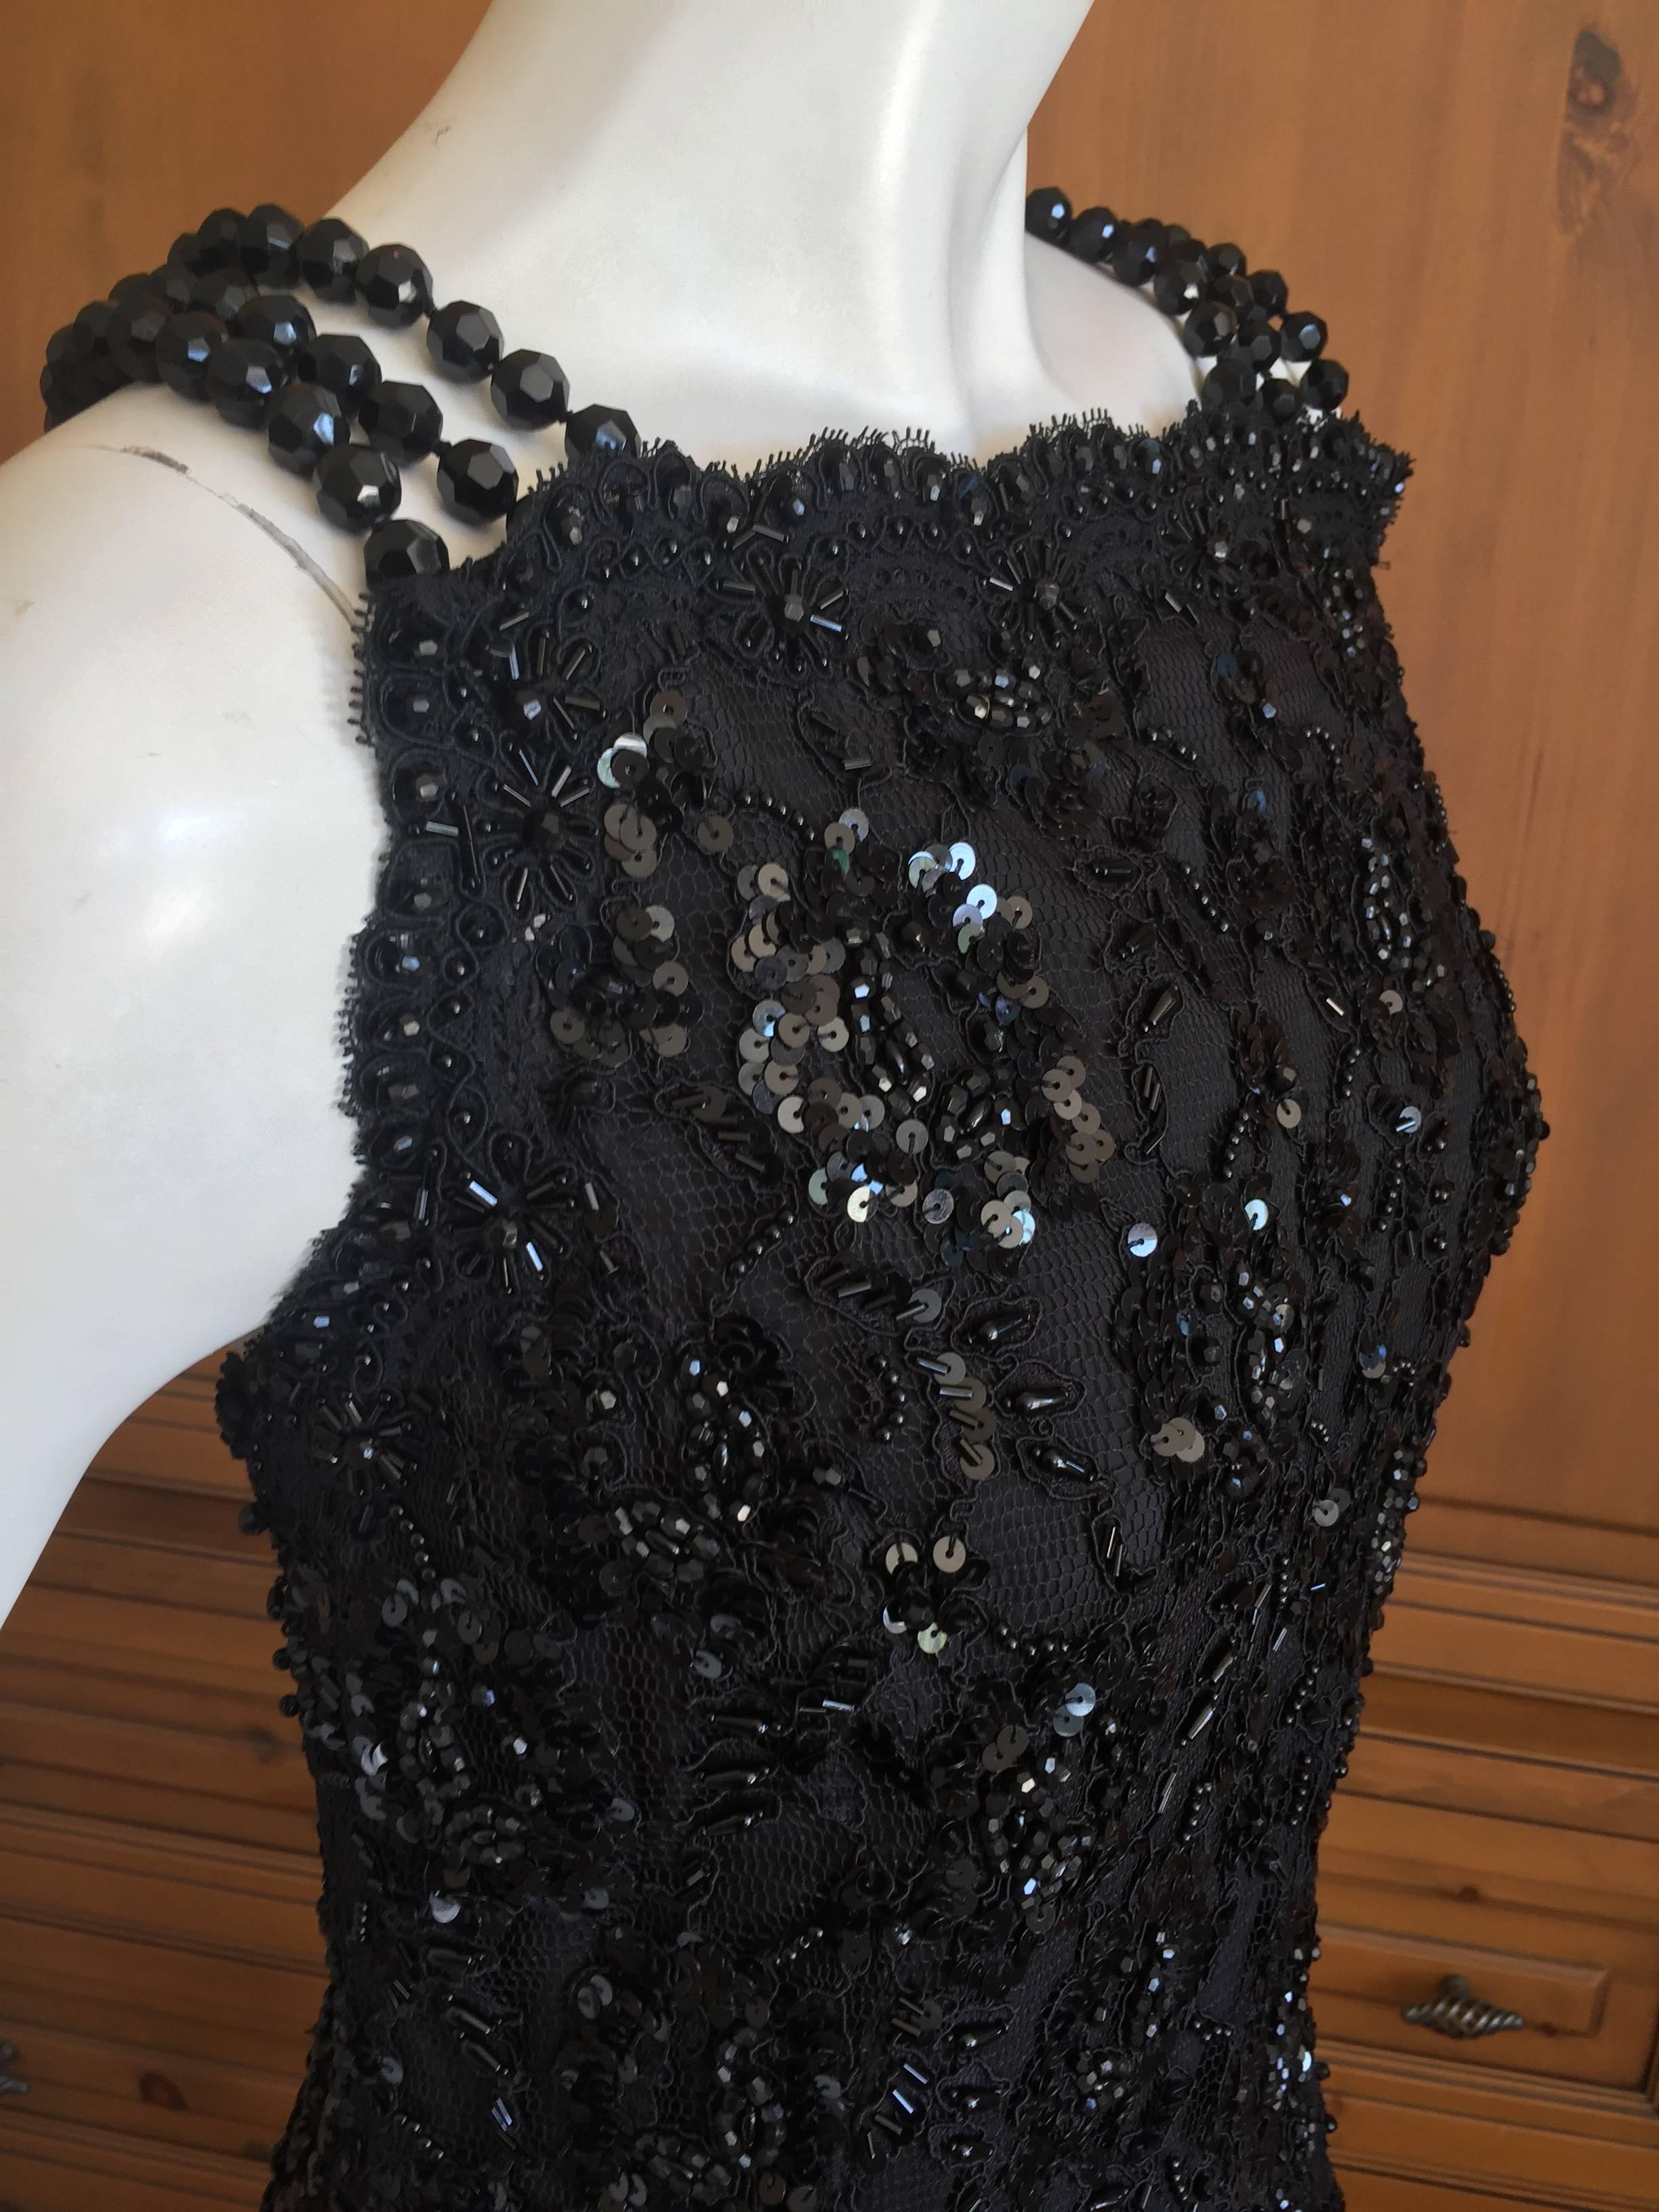 Women's Oscar de la Renta 1980's Sequin Cocktail Dress with Beads and Bow